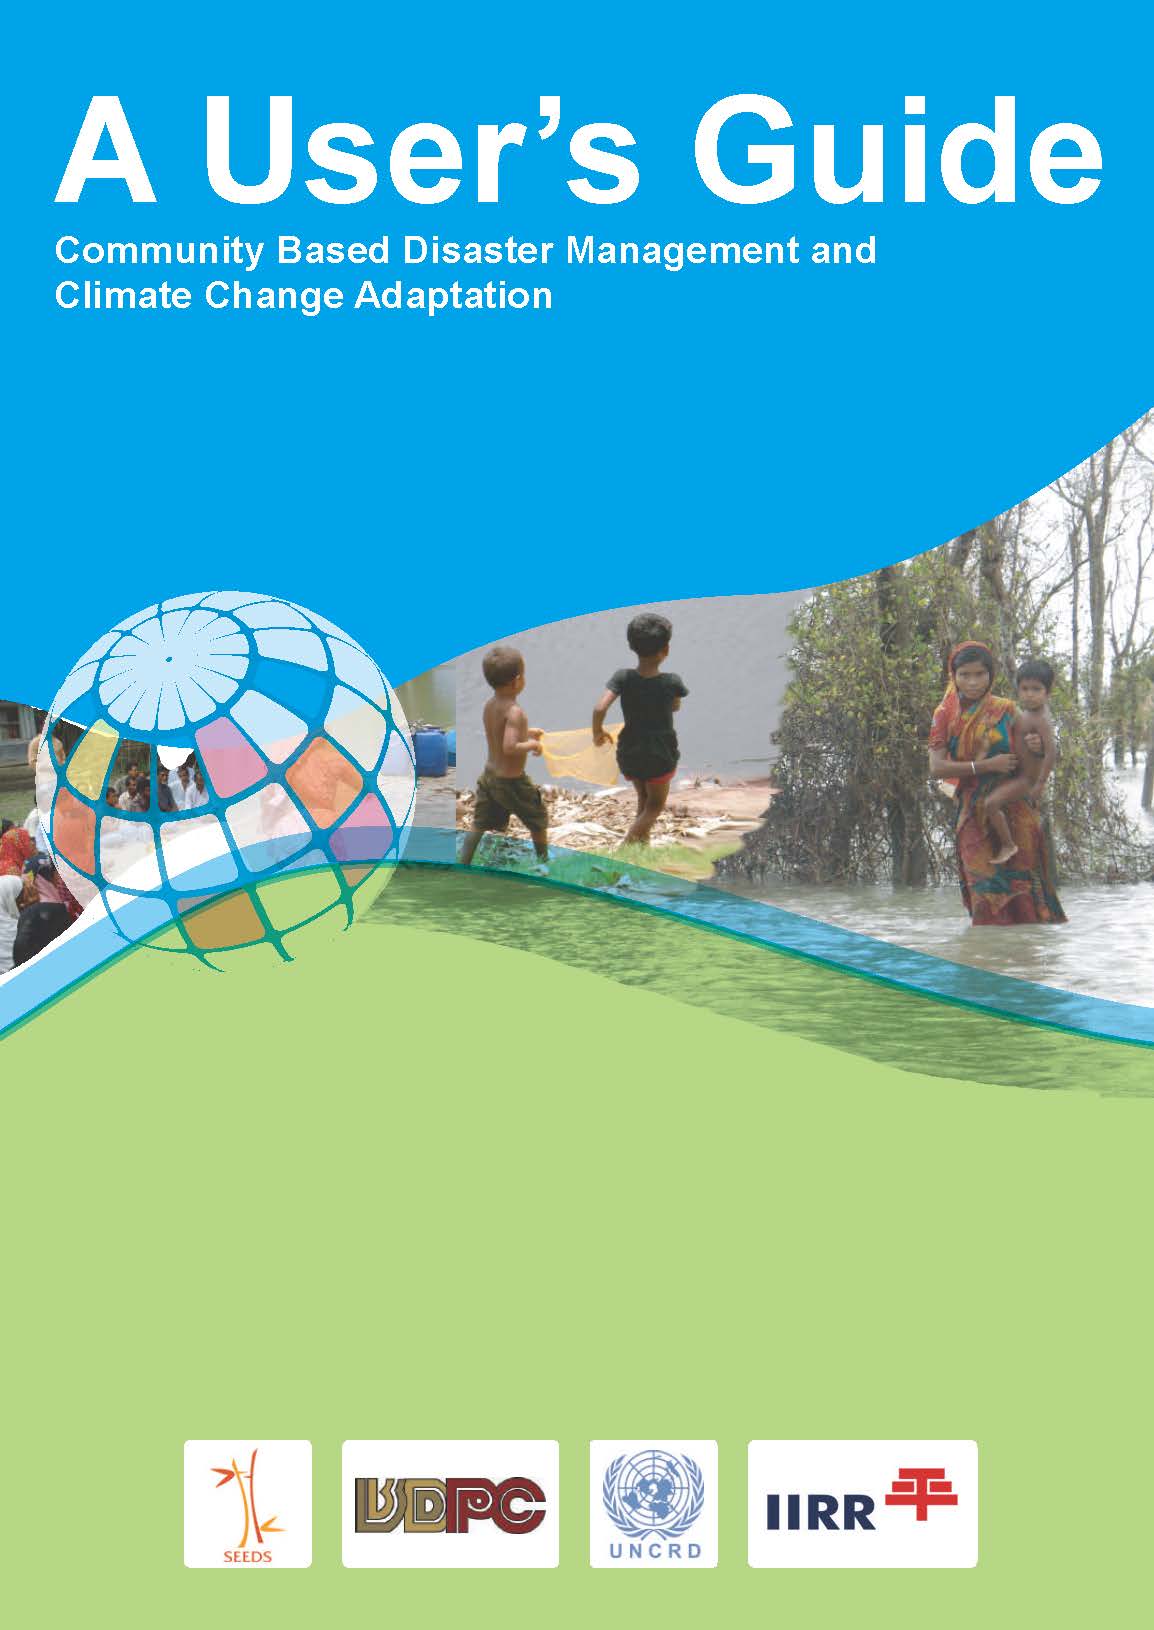 Cover of the A User's Guide: Community Based Disaster Management and Climate Change Adaptation